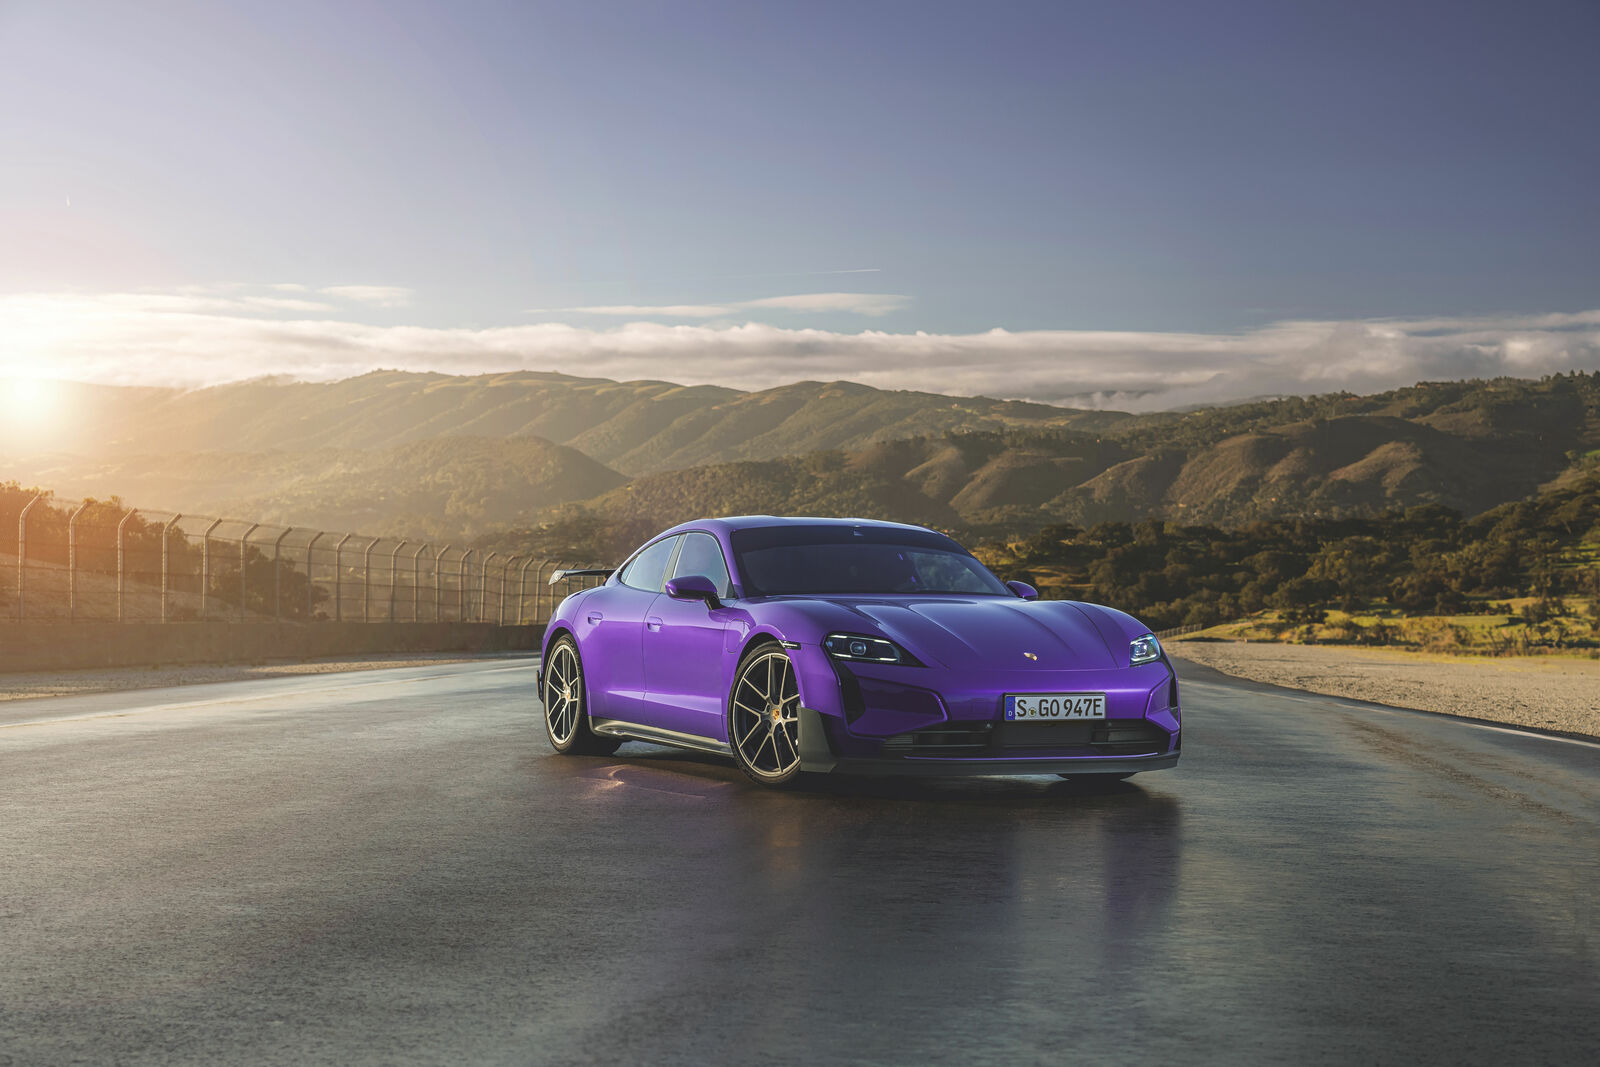 An image of a bright violet sports car parked on a racetrack, overlooking sunlit mountains in the background.